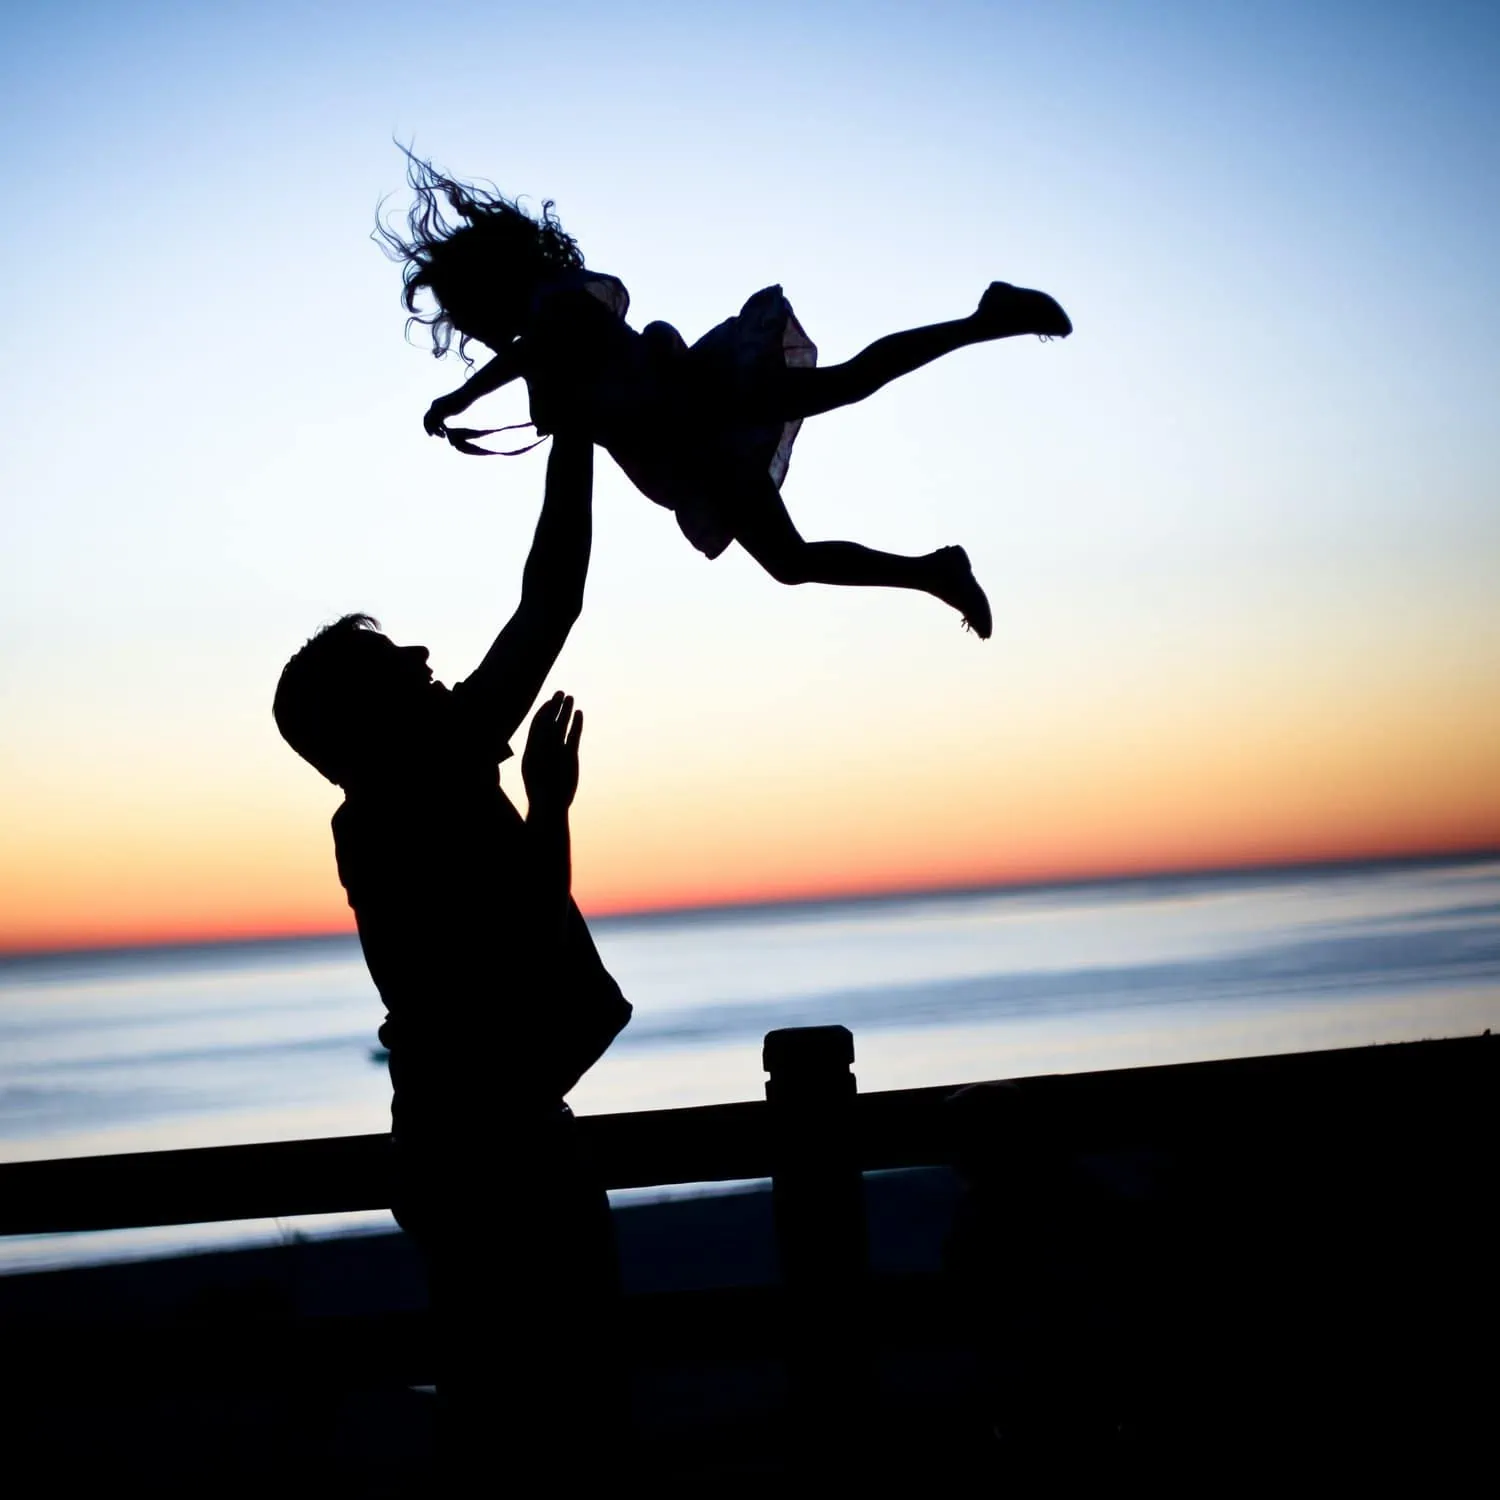 It takes trust for this father to throw his daughter